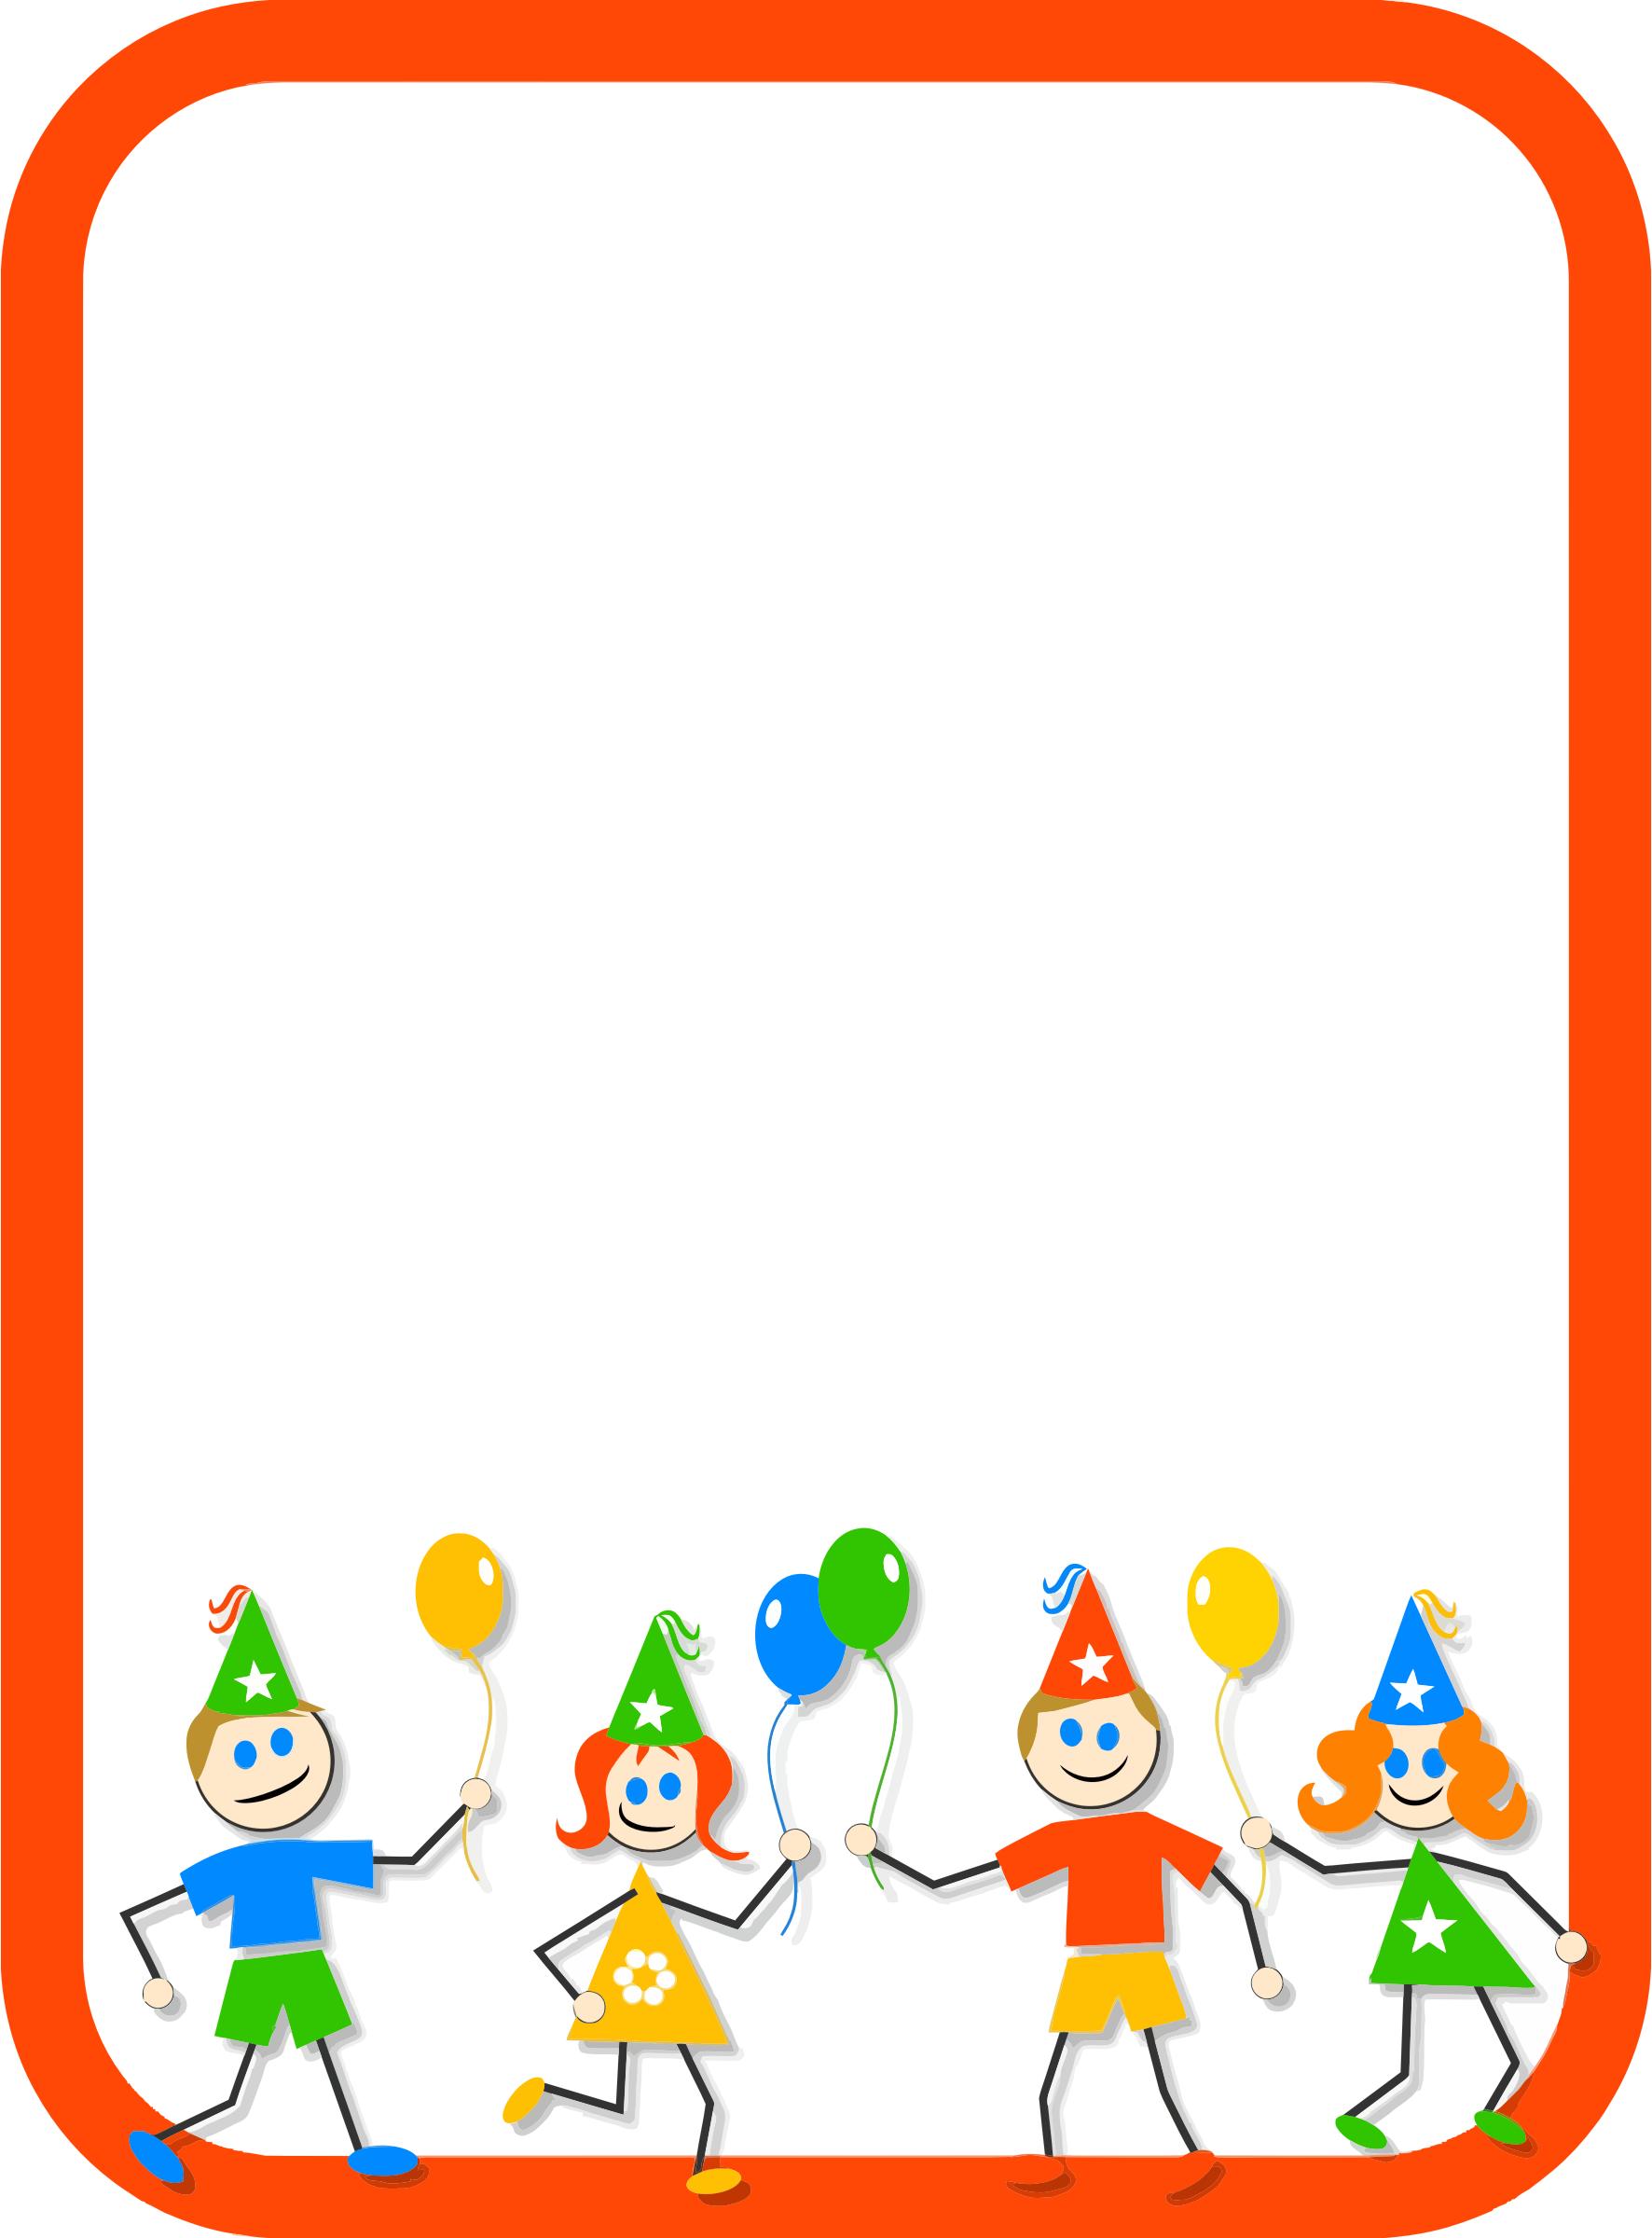 Party Border Clipart